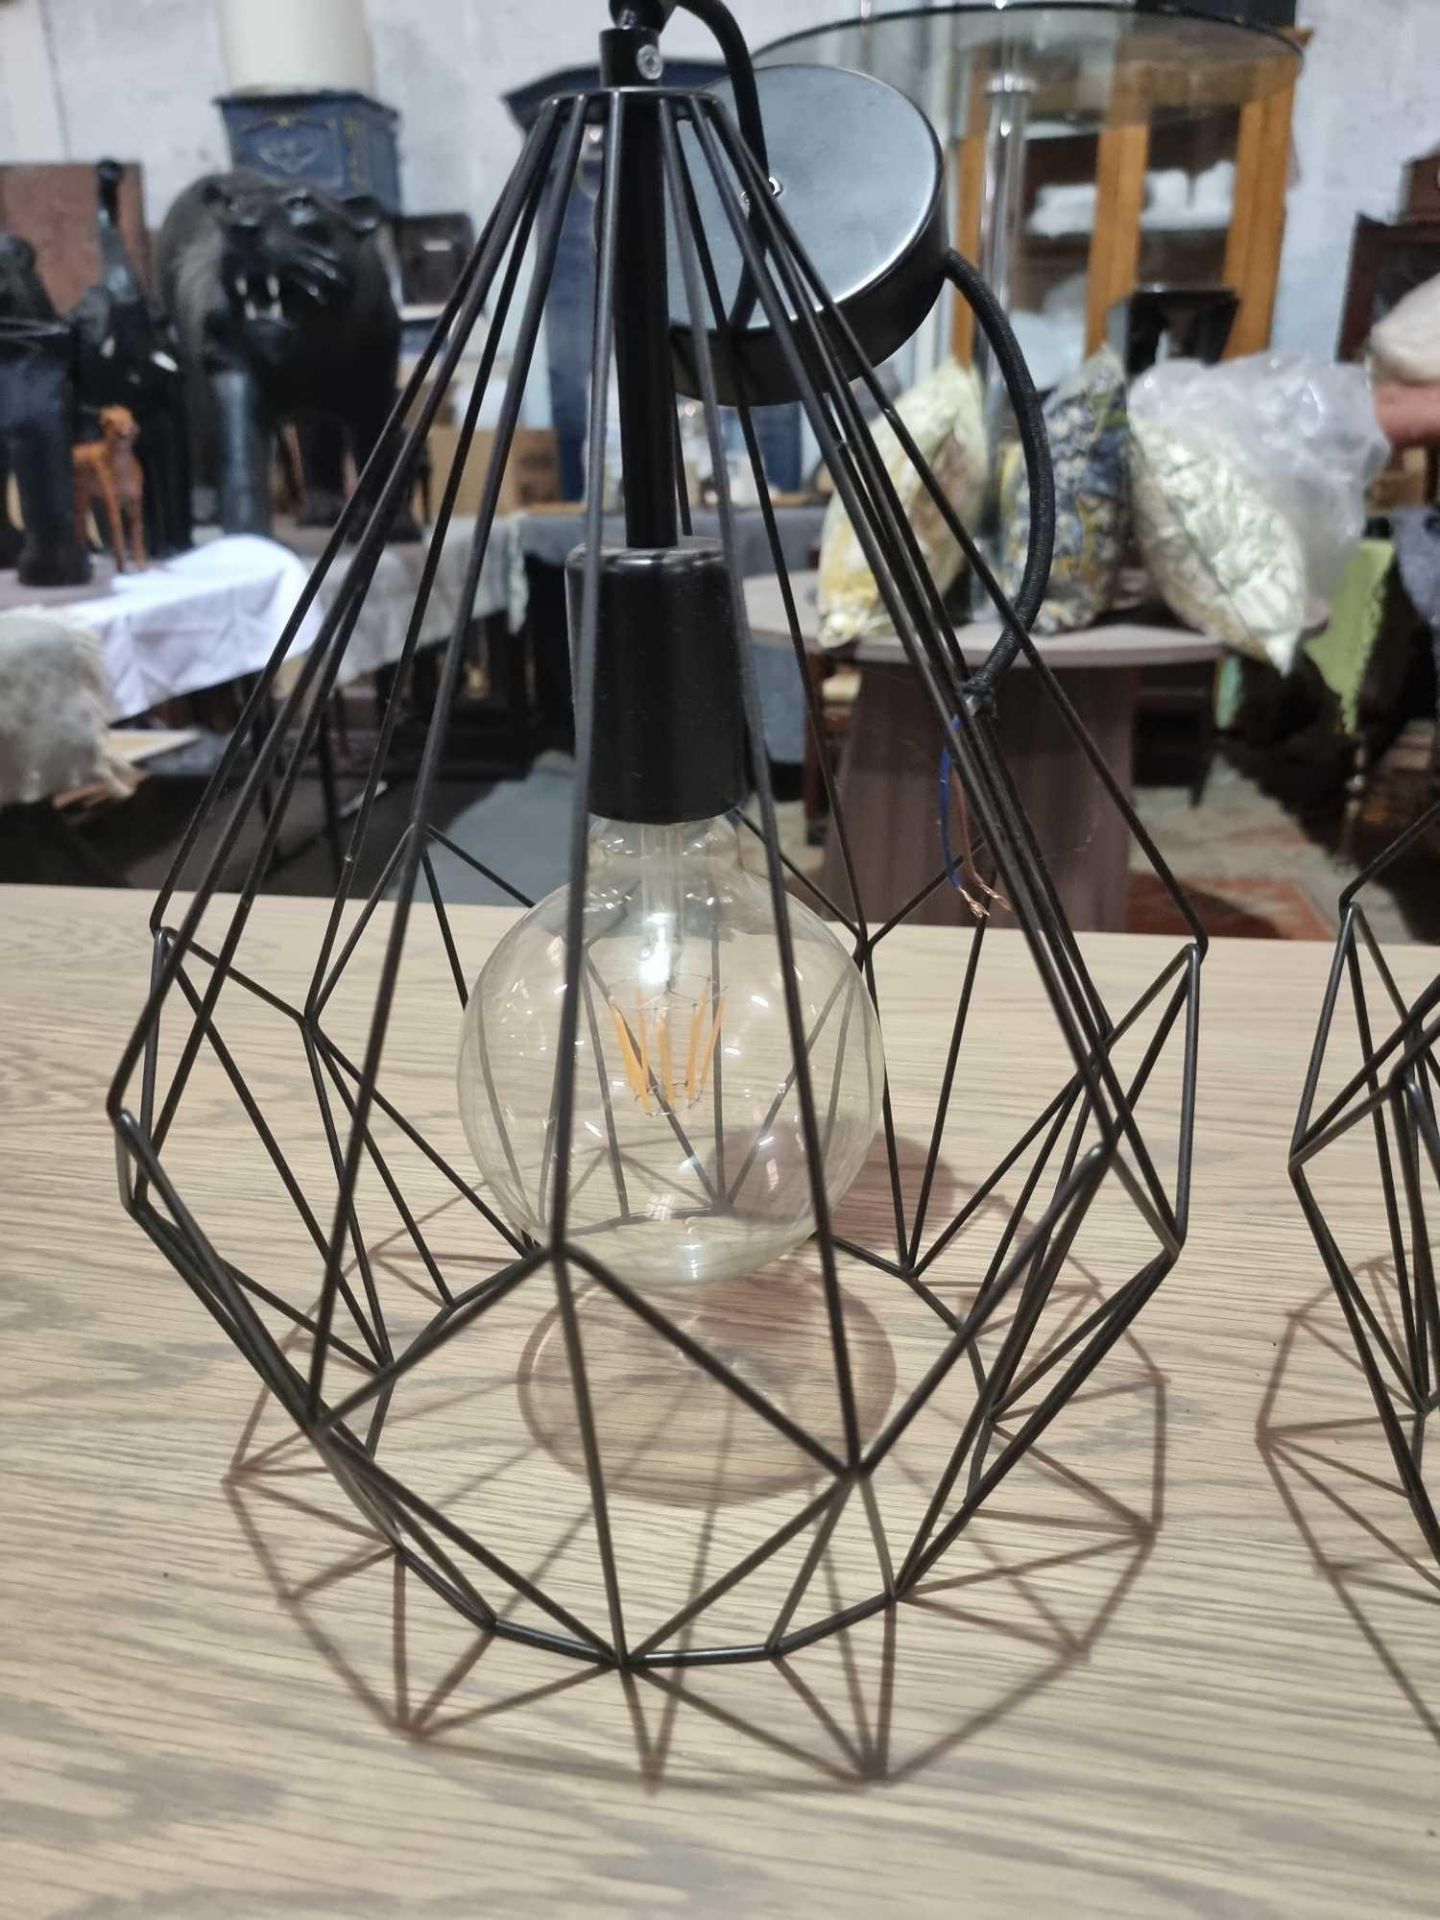 2 x Eglo Carlton Pendant Lights The Pendant Light Features A Black Diamond-Shaped Caged Body. The - Image 2 of 5